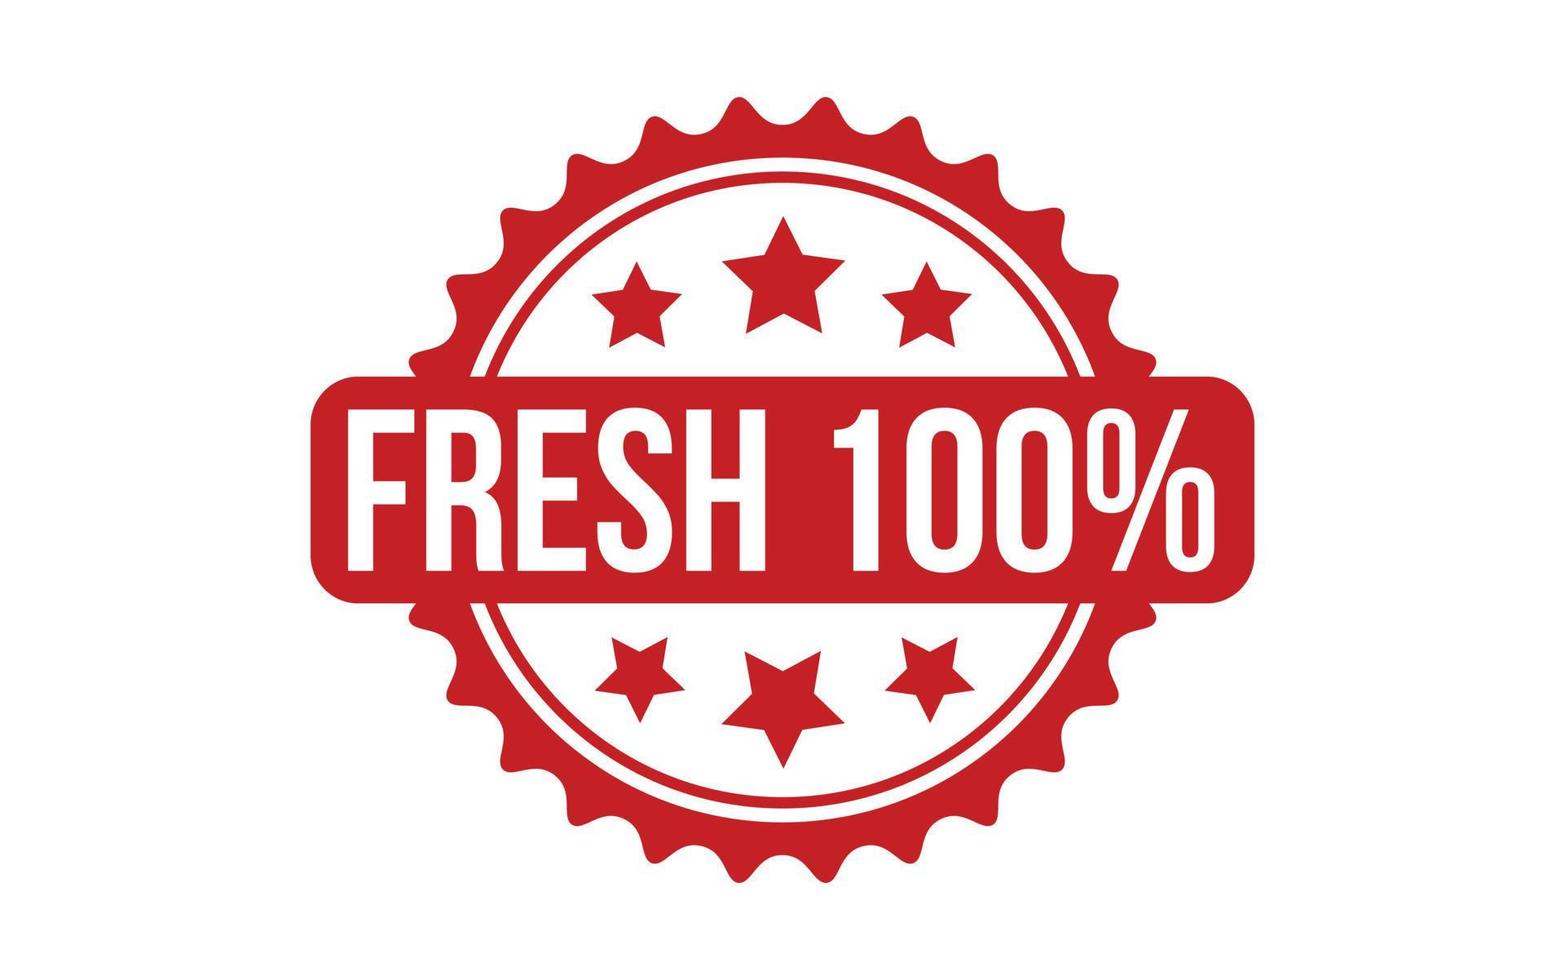 Fresh 100 Percent Rubber Stamp Seal Vector